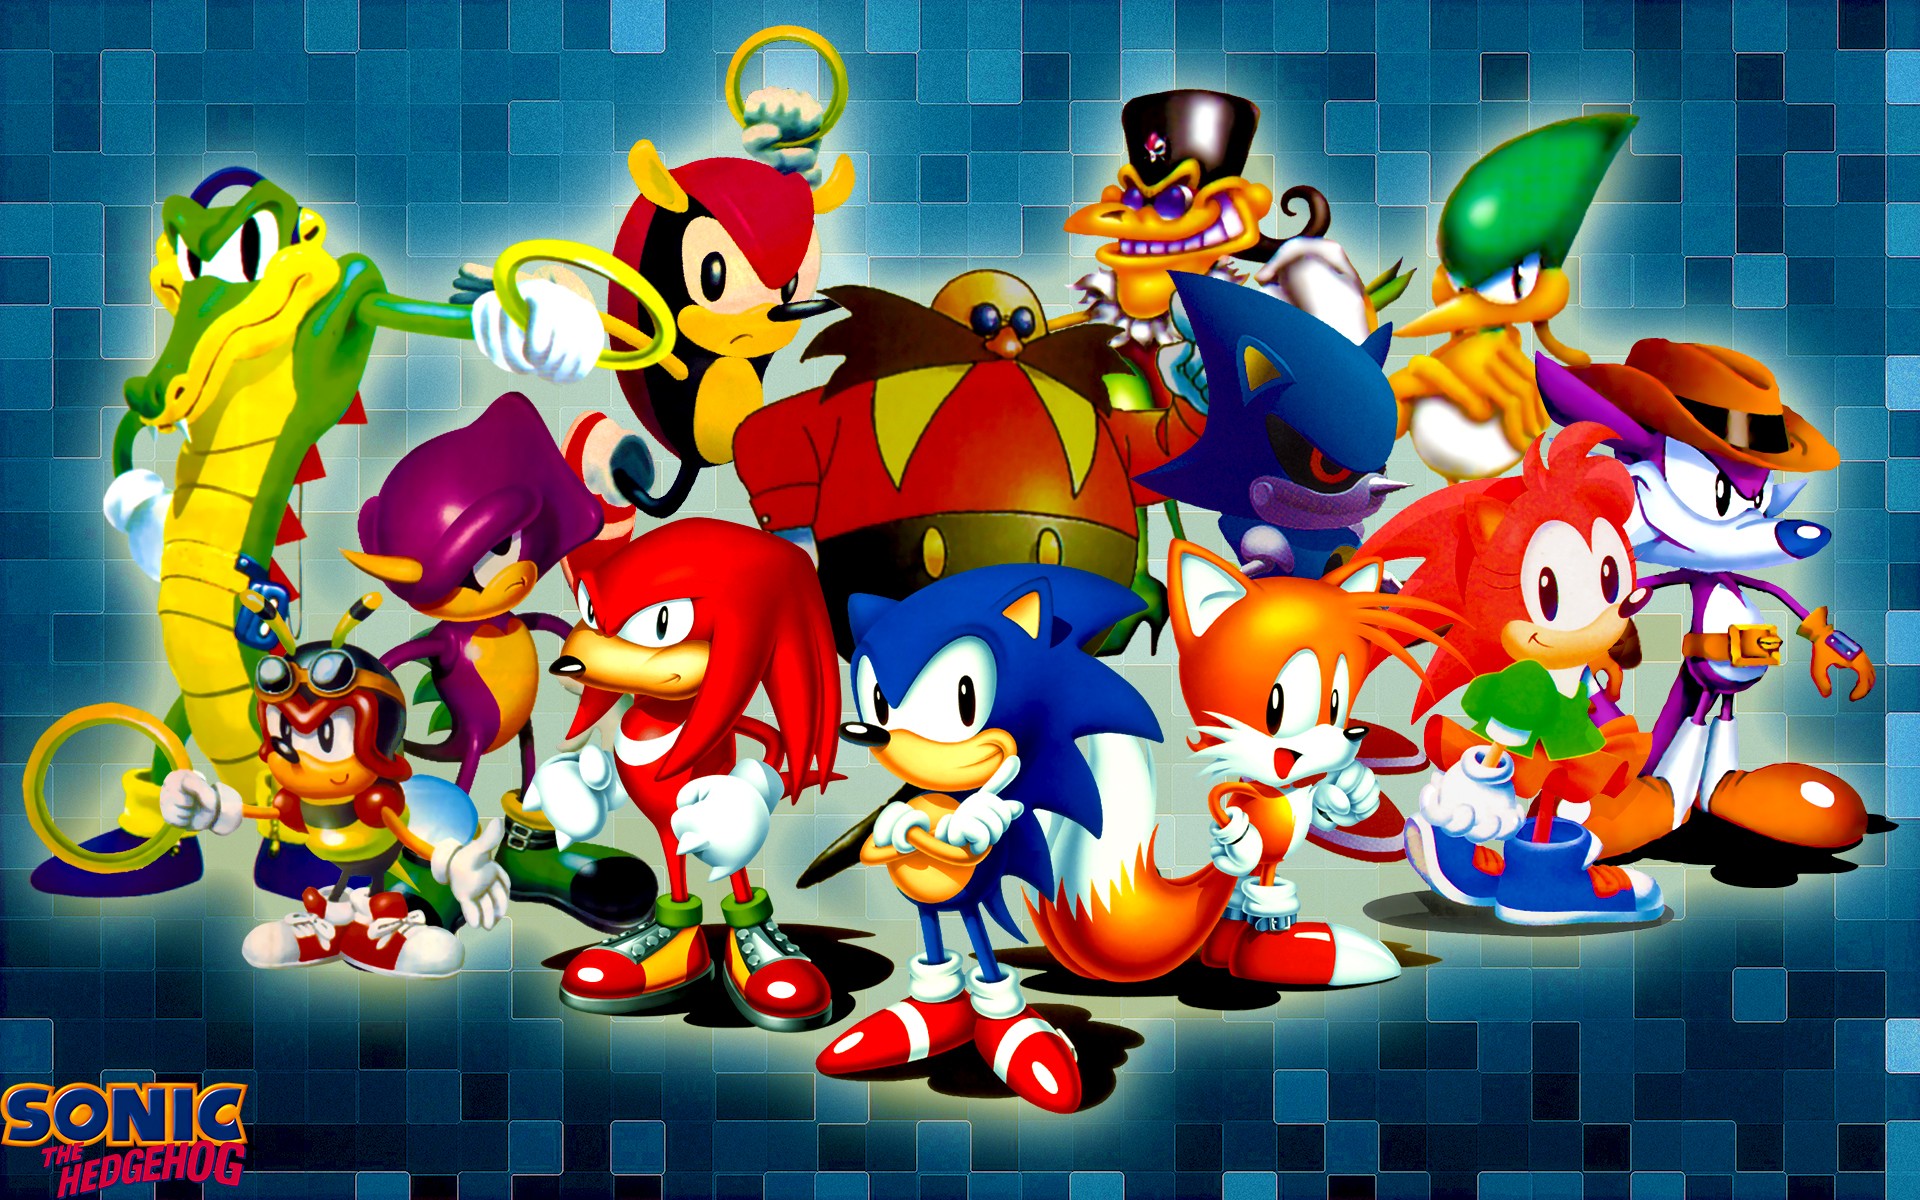 Sonic The Hedgehog Backgrounds, Pictures, Images